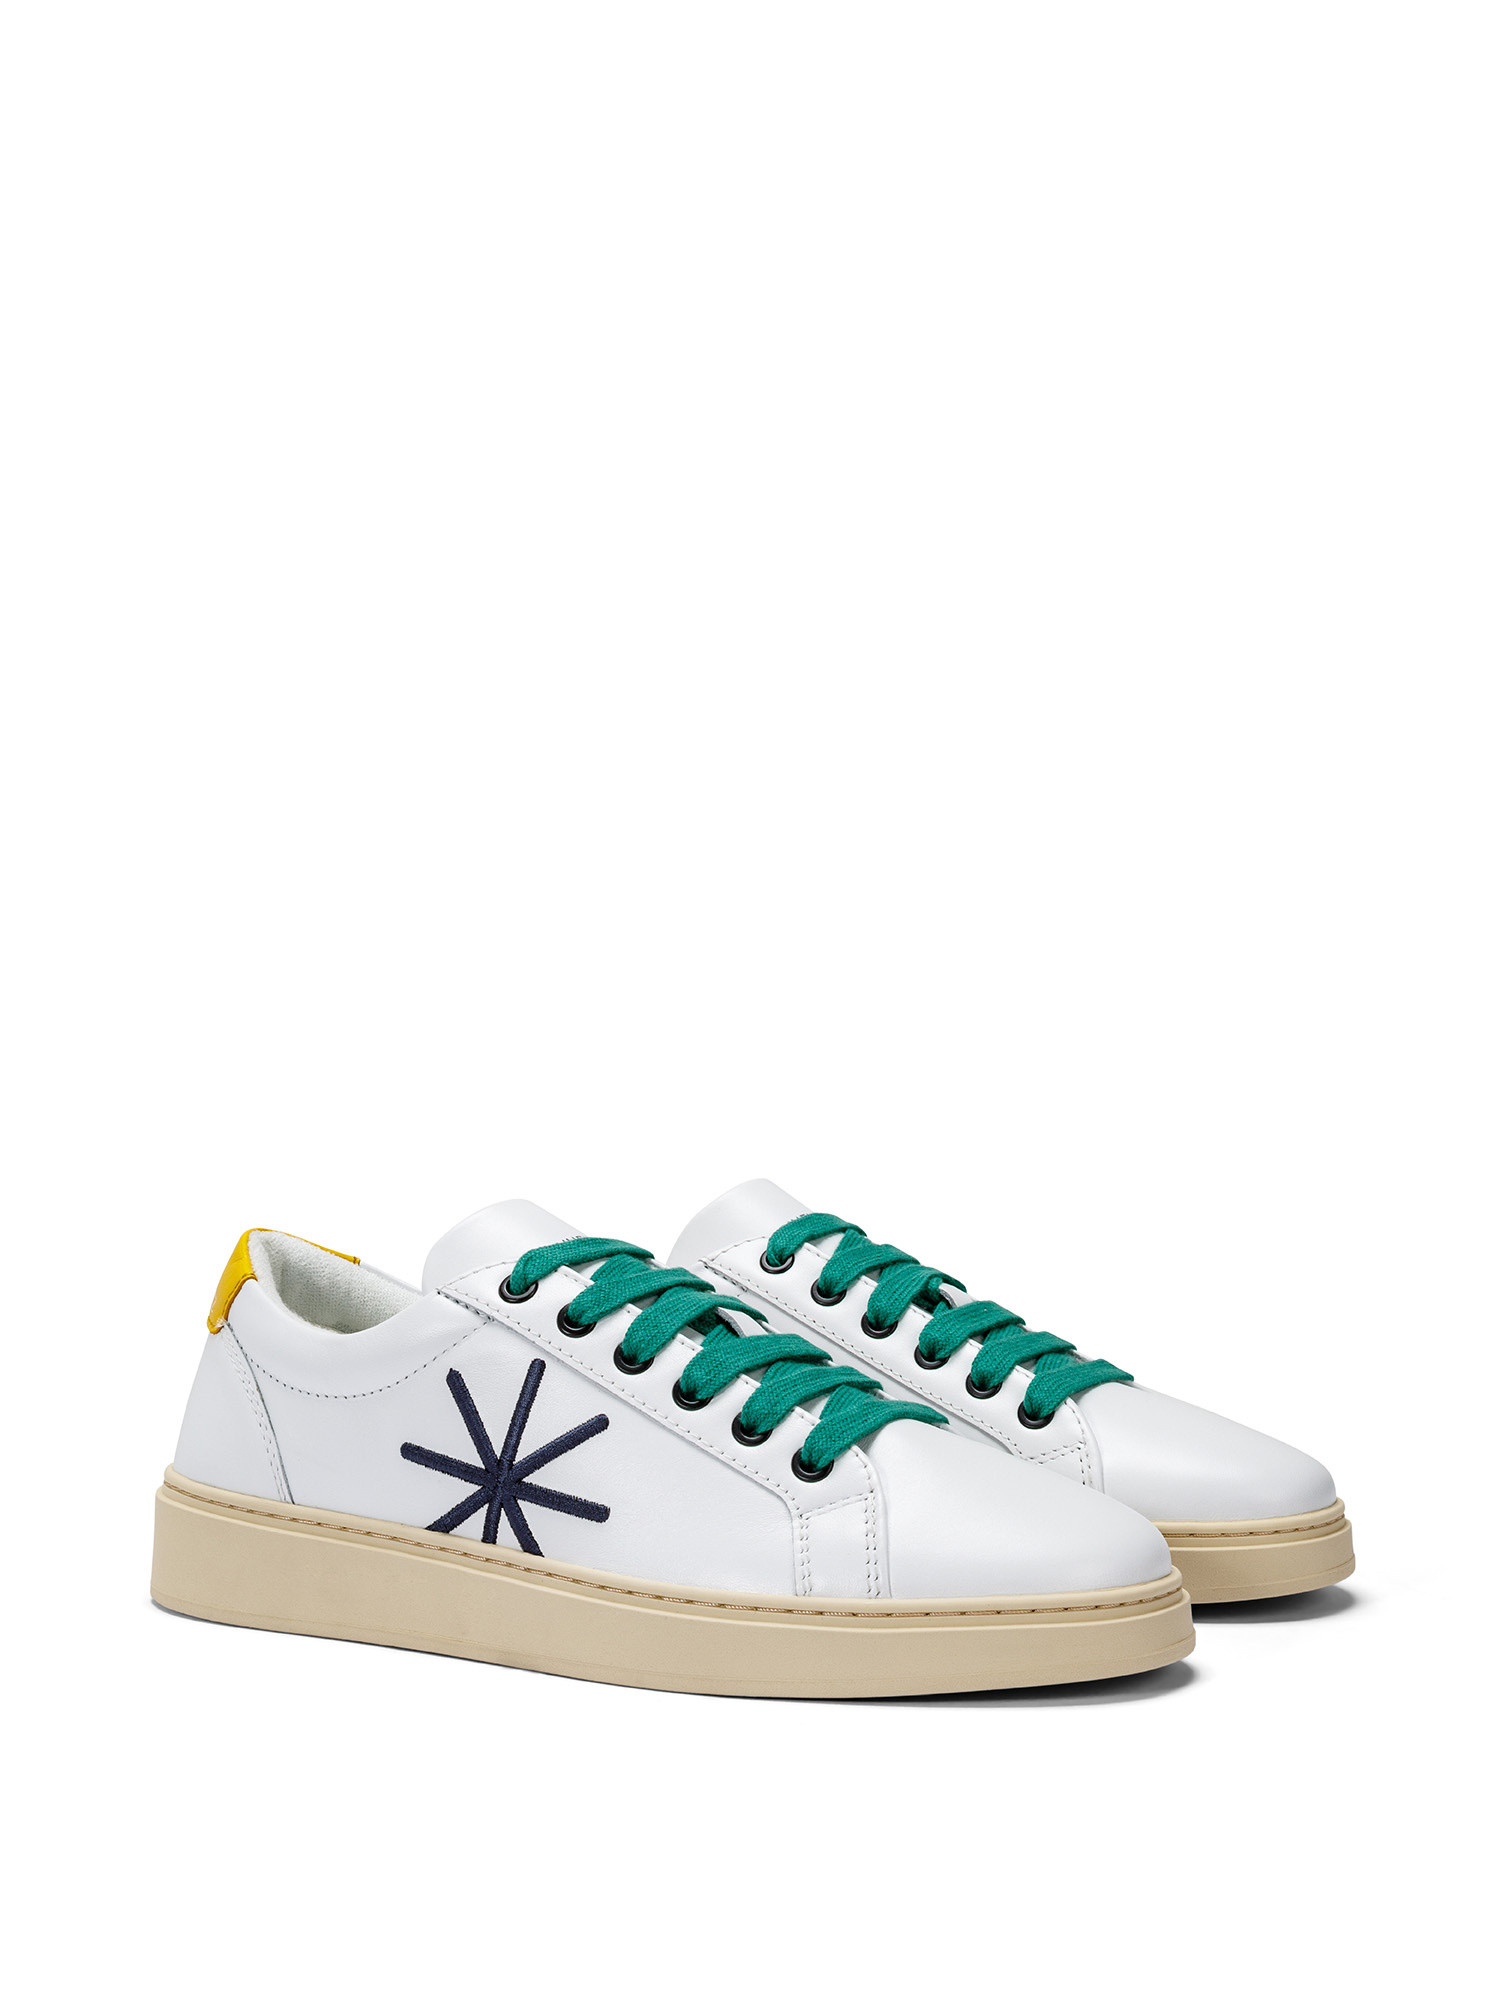 Manuel Ritz - Leather sneakers with logo, White, large image number 1